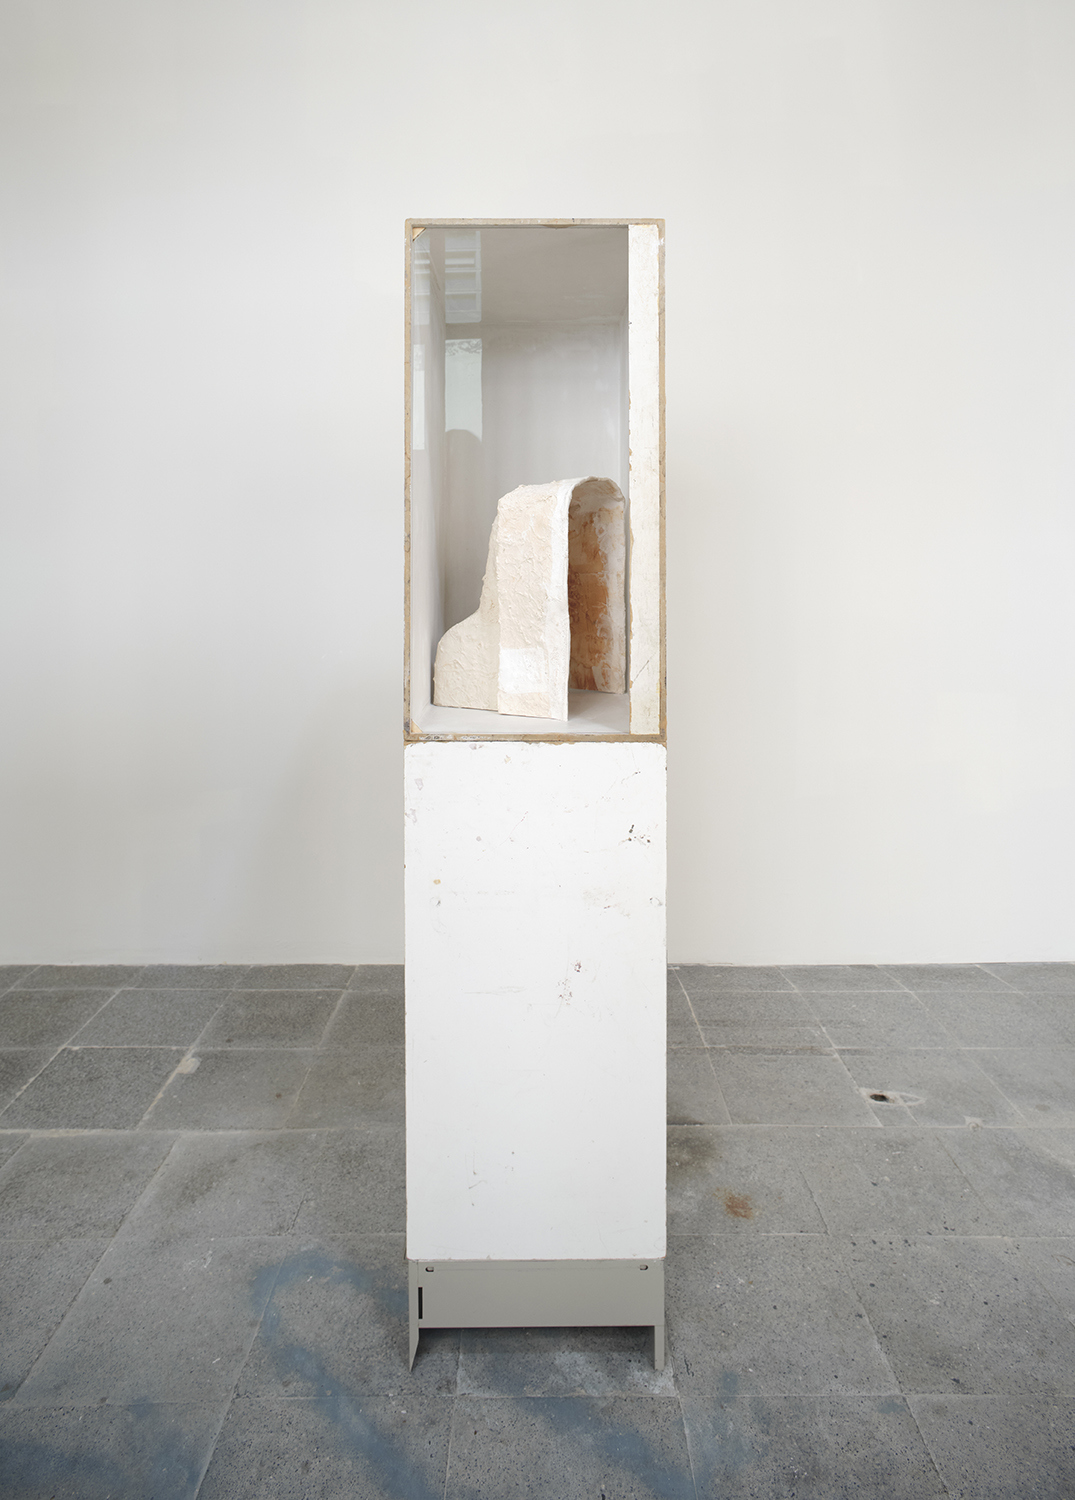 Ian Waelder. You who are the stranger (Torso), 2022. Marks of use on wood, remnants of the Opel Olympia sculpture mould made in collab between the artist and his father, plaster strips, inkjet print, museum glass, metal filing cabinets. 178 x 60 x 40 cm.